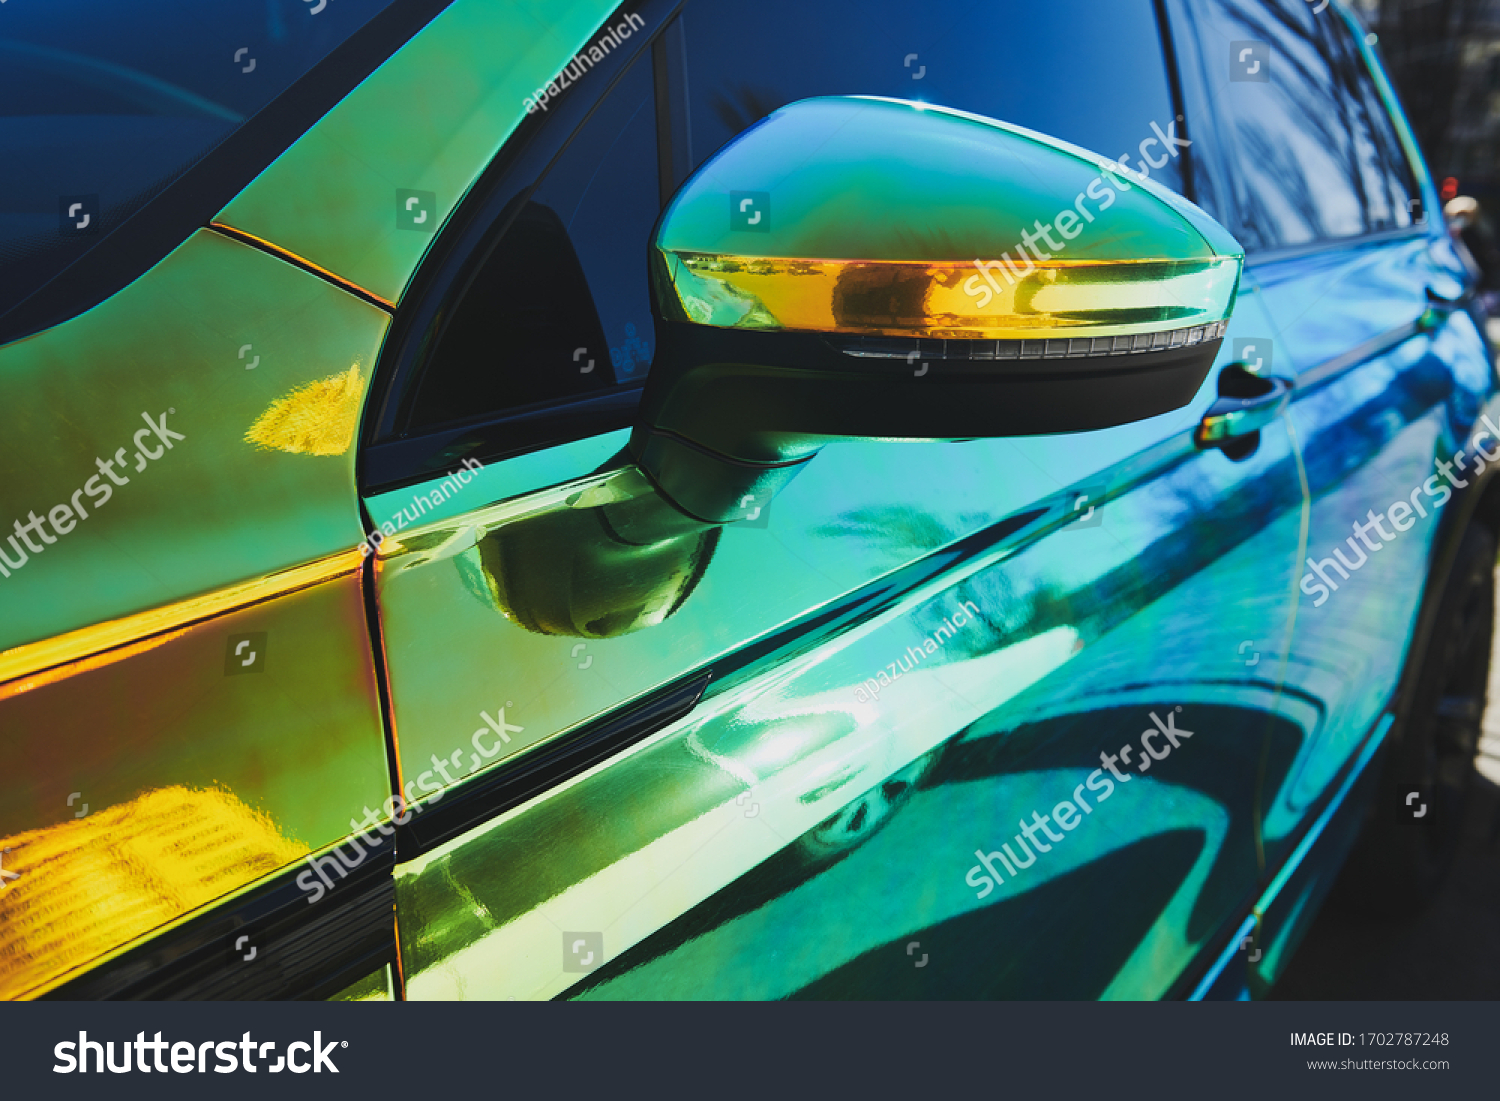 Chameleon holographic colour car. Side view. Driver's door and side mirror. closeup. Car wrapping. Car exhibition. #1702787248